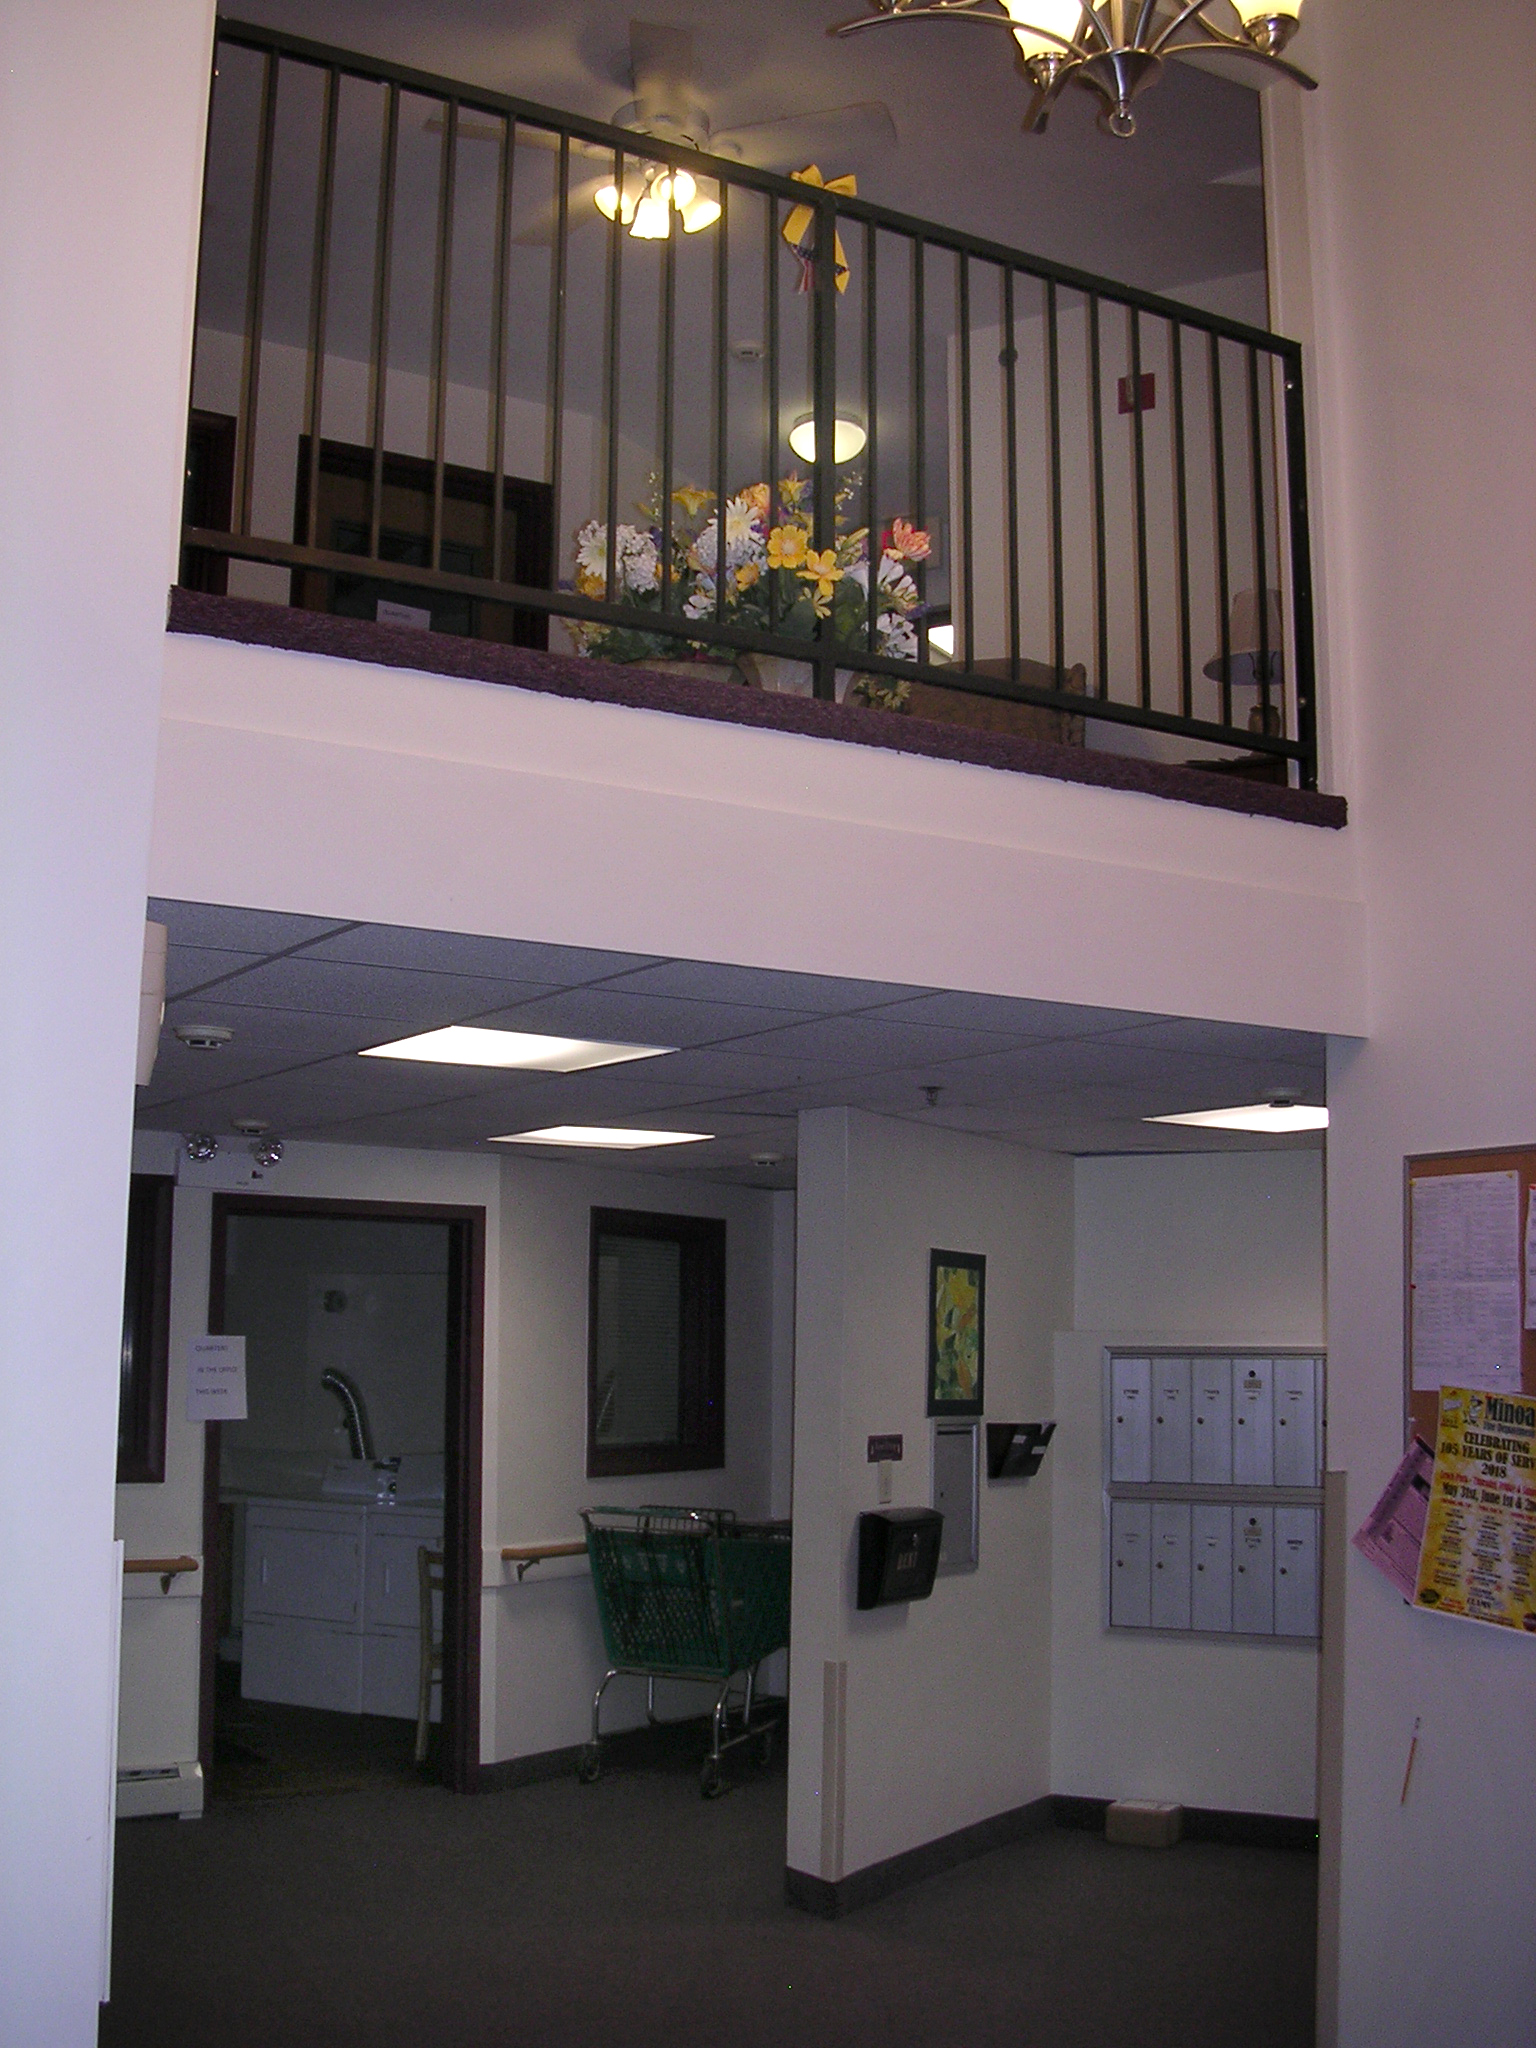 property management company syracuse ny image of lobby for colonial village